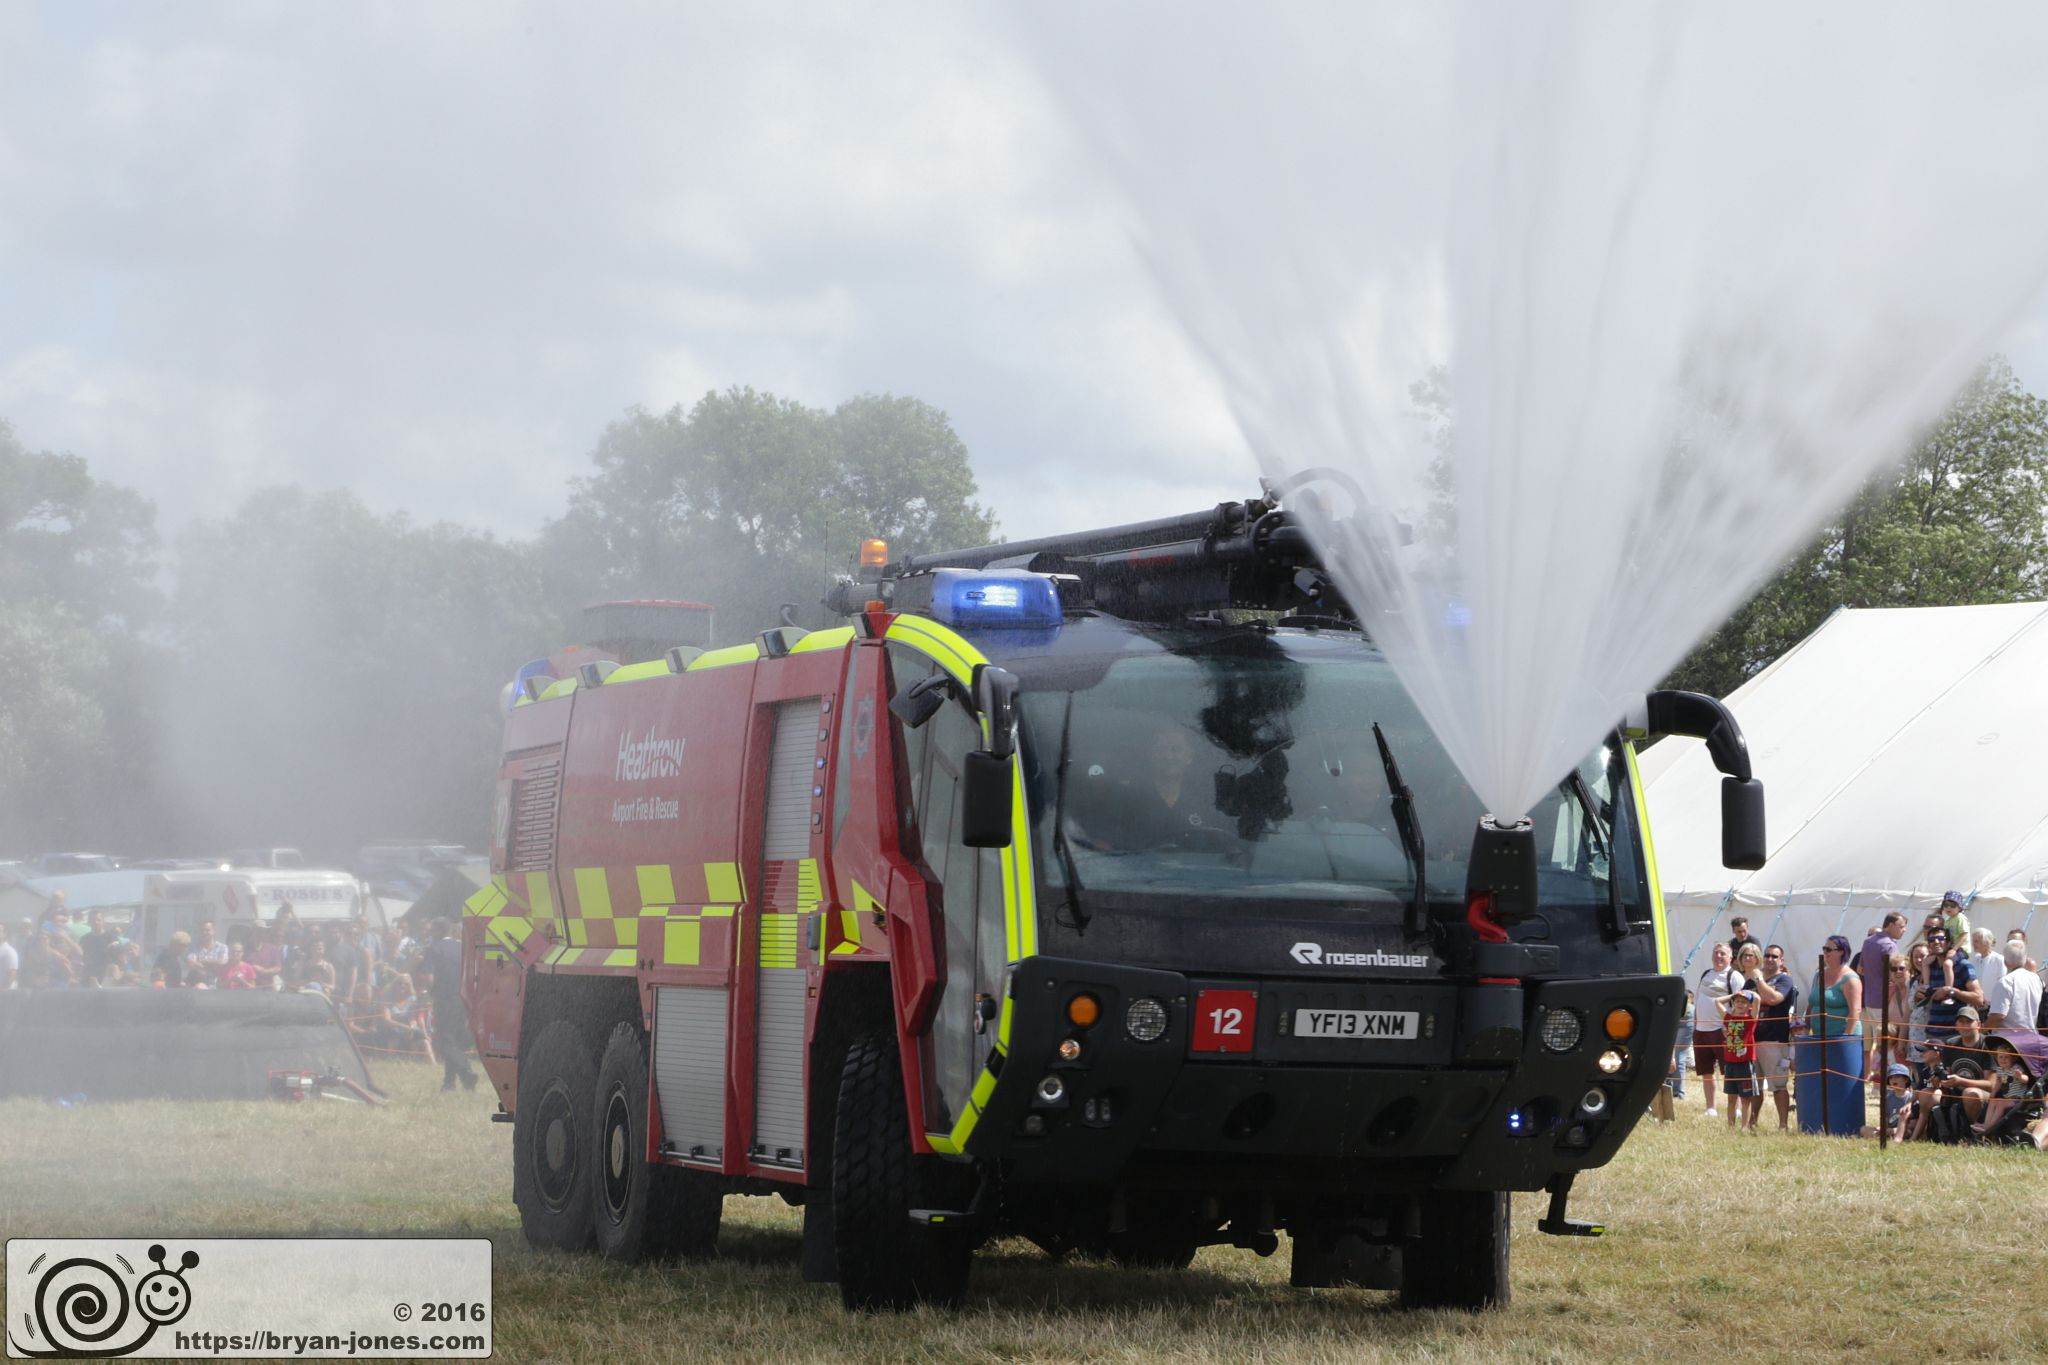 2016 Odiham Fire Show 07-Aug-2016. Heathrow Airport Fire and Rescue Rosenbauer Panther Airfield Rescuee Firefighting (ARFF) crash tender fire appliance with Stinger. YF13XNM